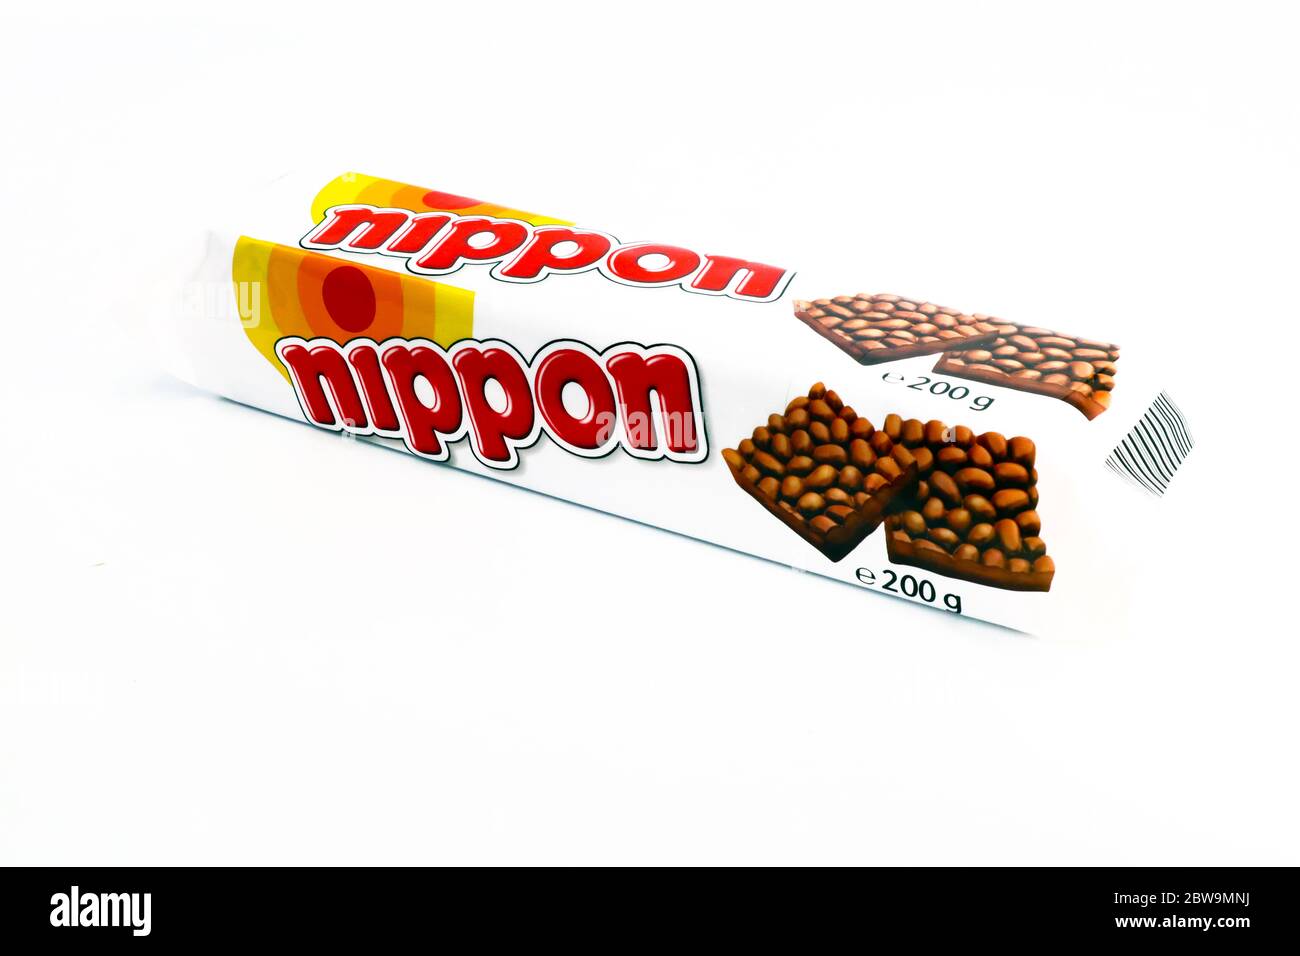 NIPPON, fluffy and light puffed rice with chocolate coating produced by Hosta Stock Photo